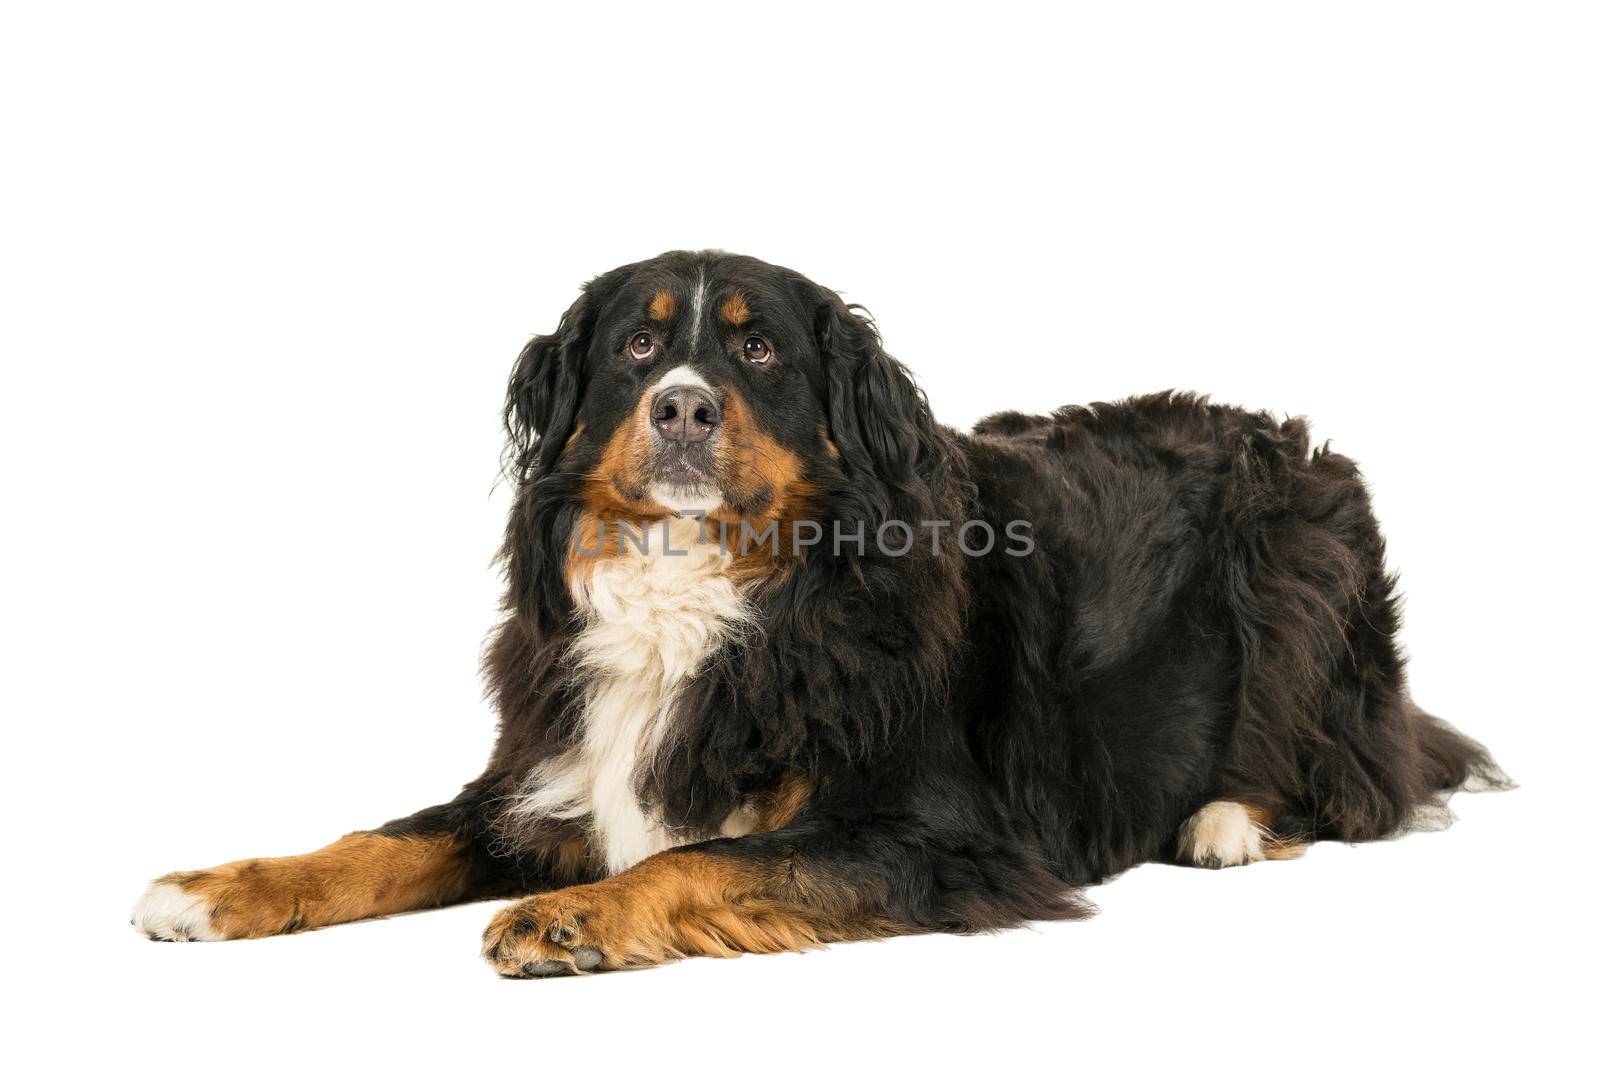 Berner Sennen Mountain dog lying looking up isolated on a white background by LeoniekvanderVliet